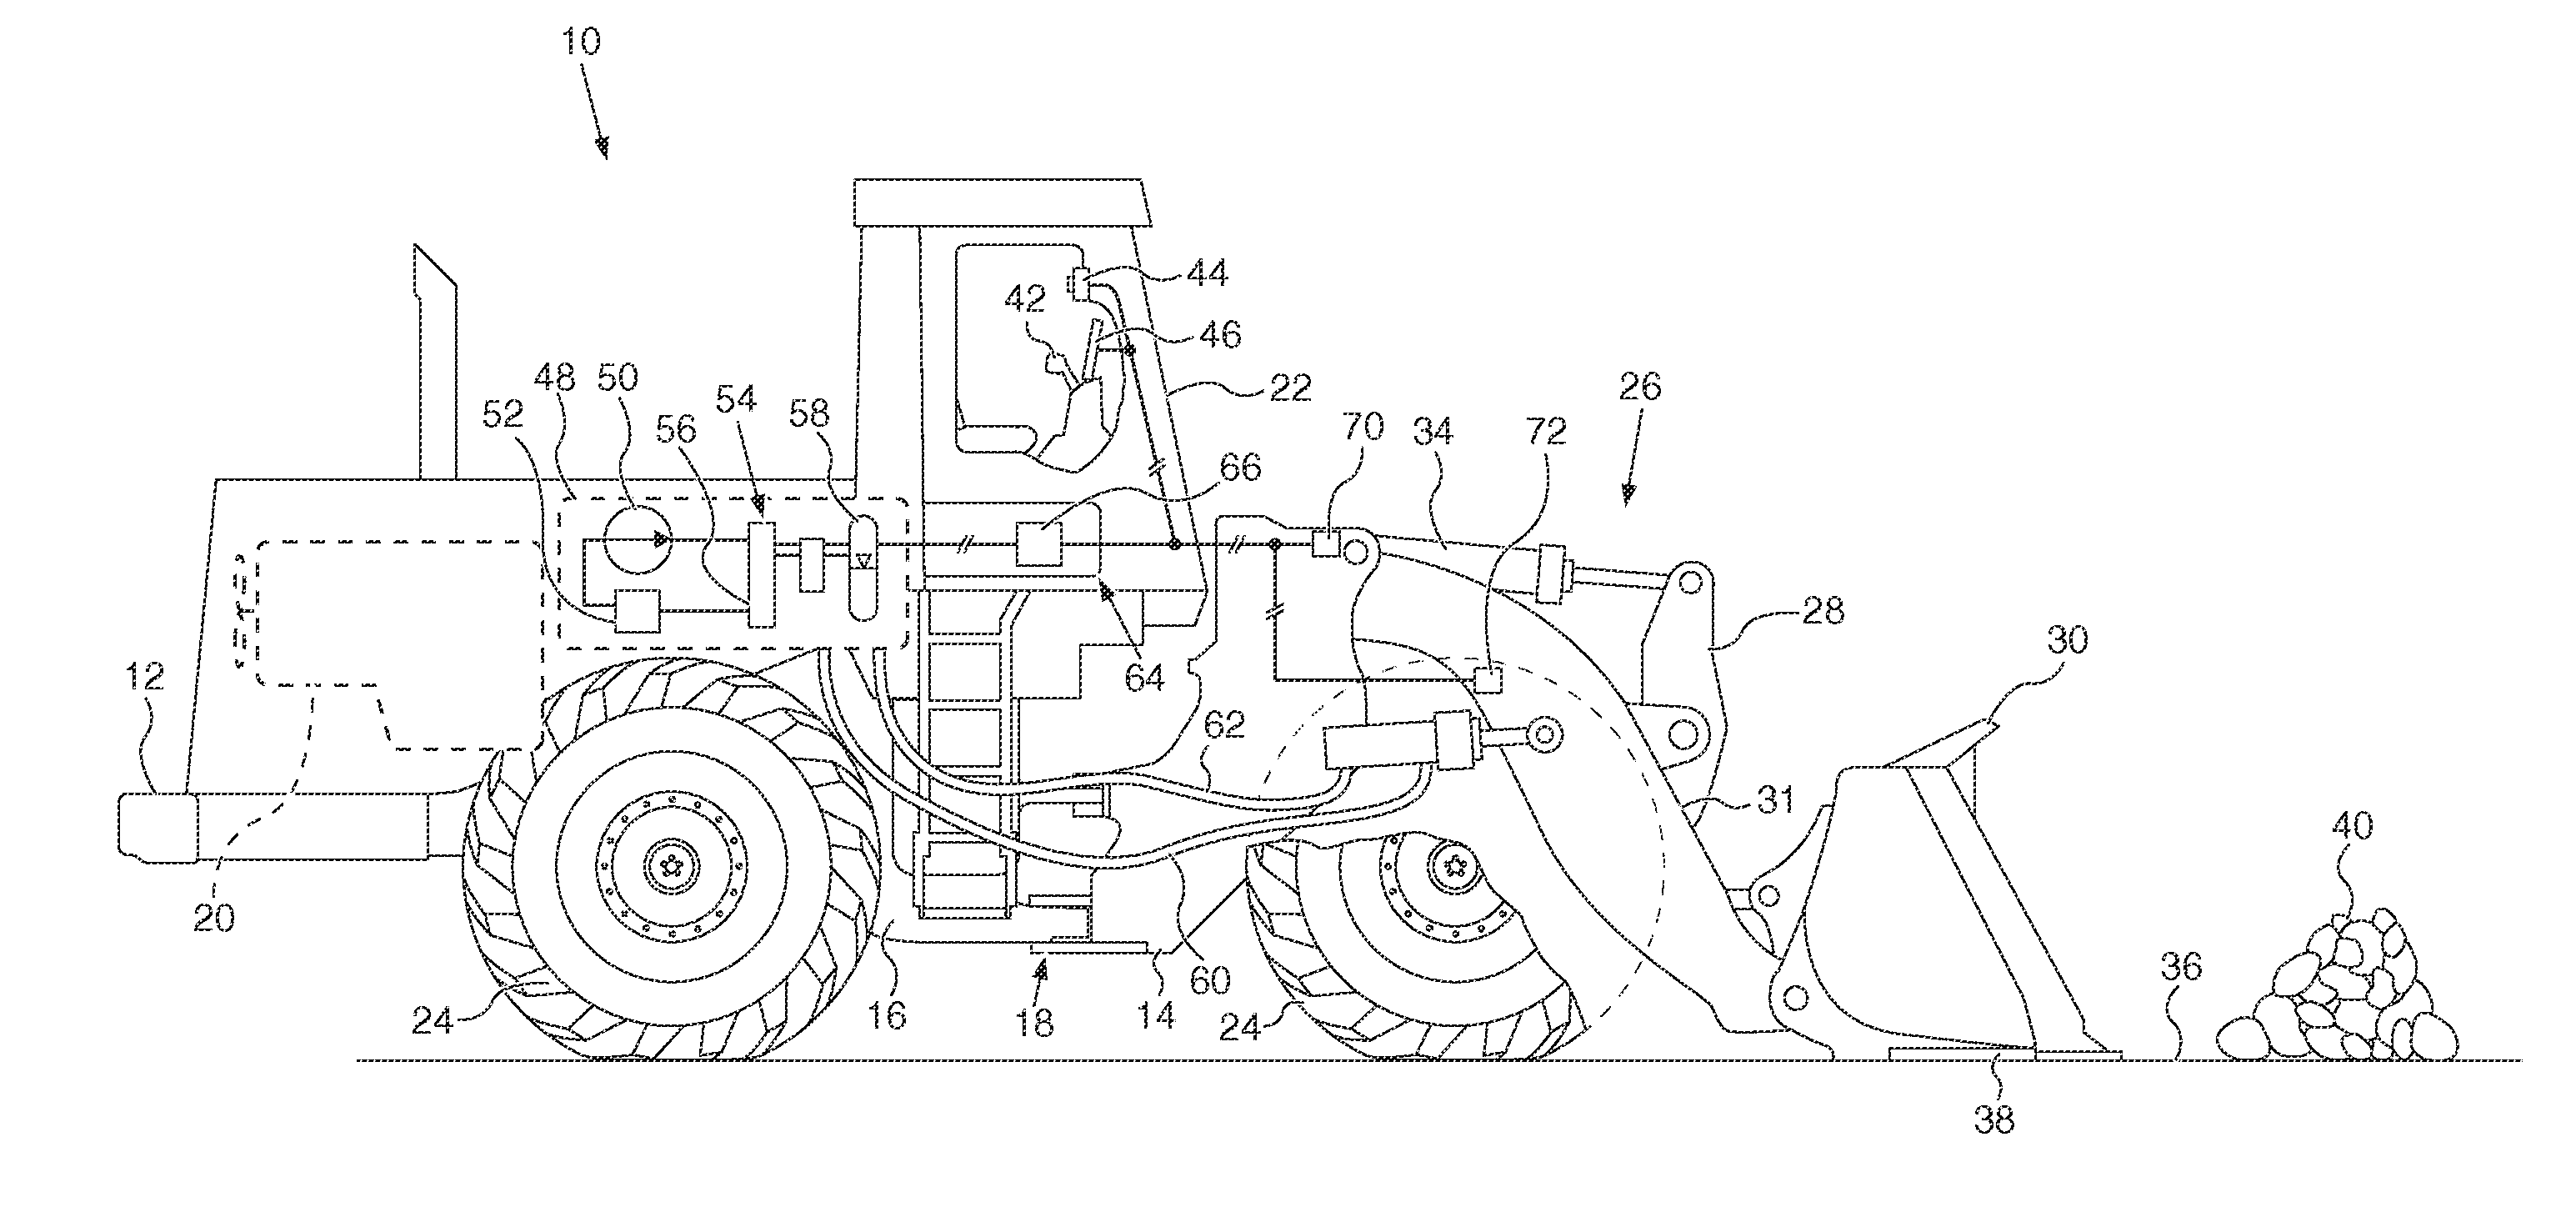 Machine having hydraulically actuated implement system with combined ride control and downforce control system